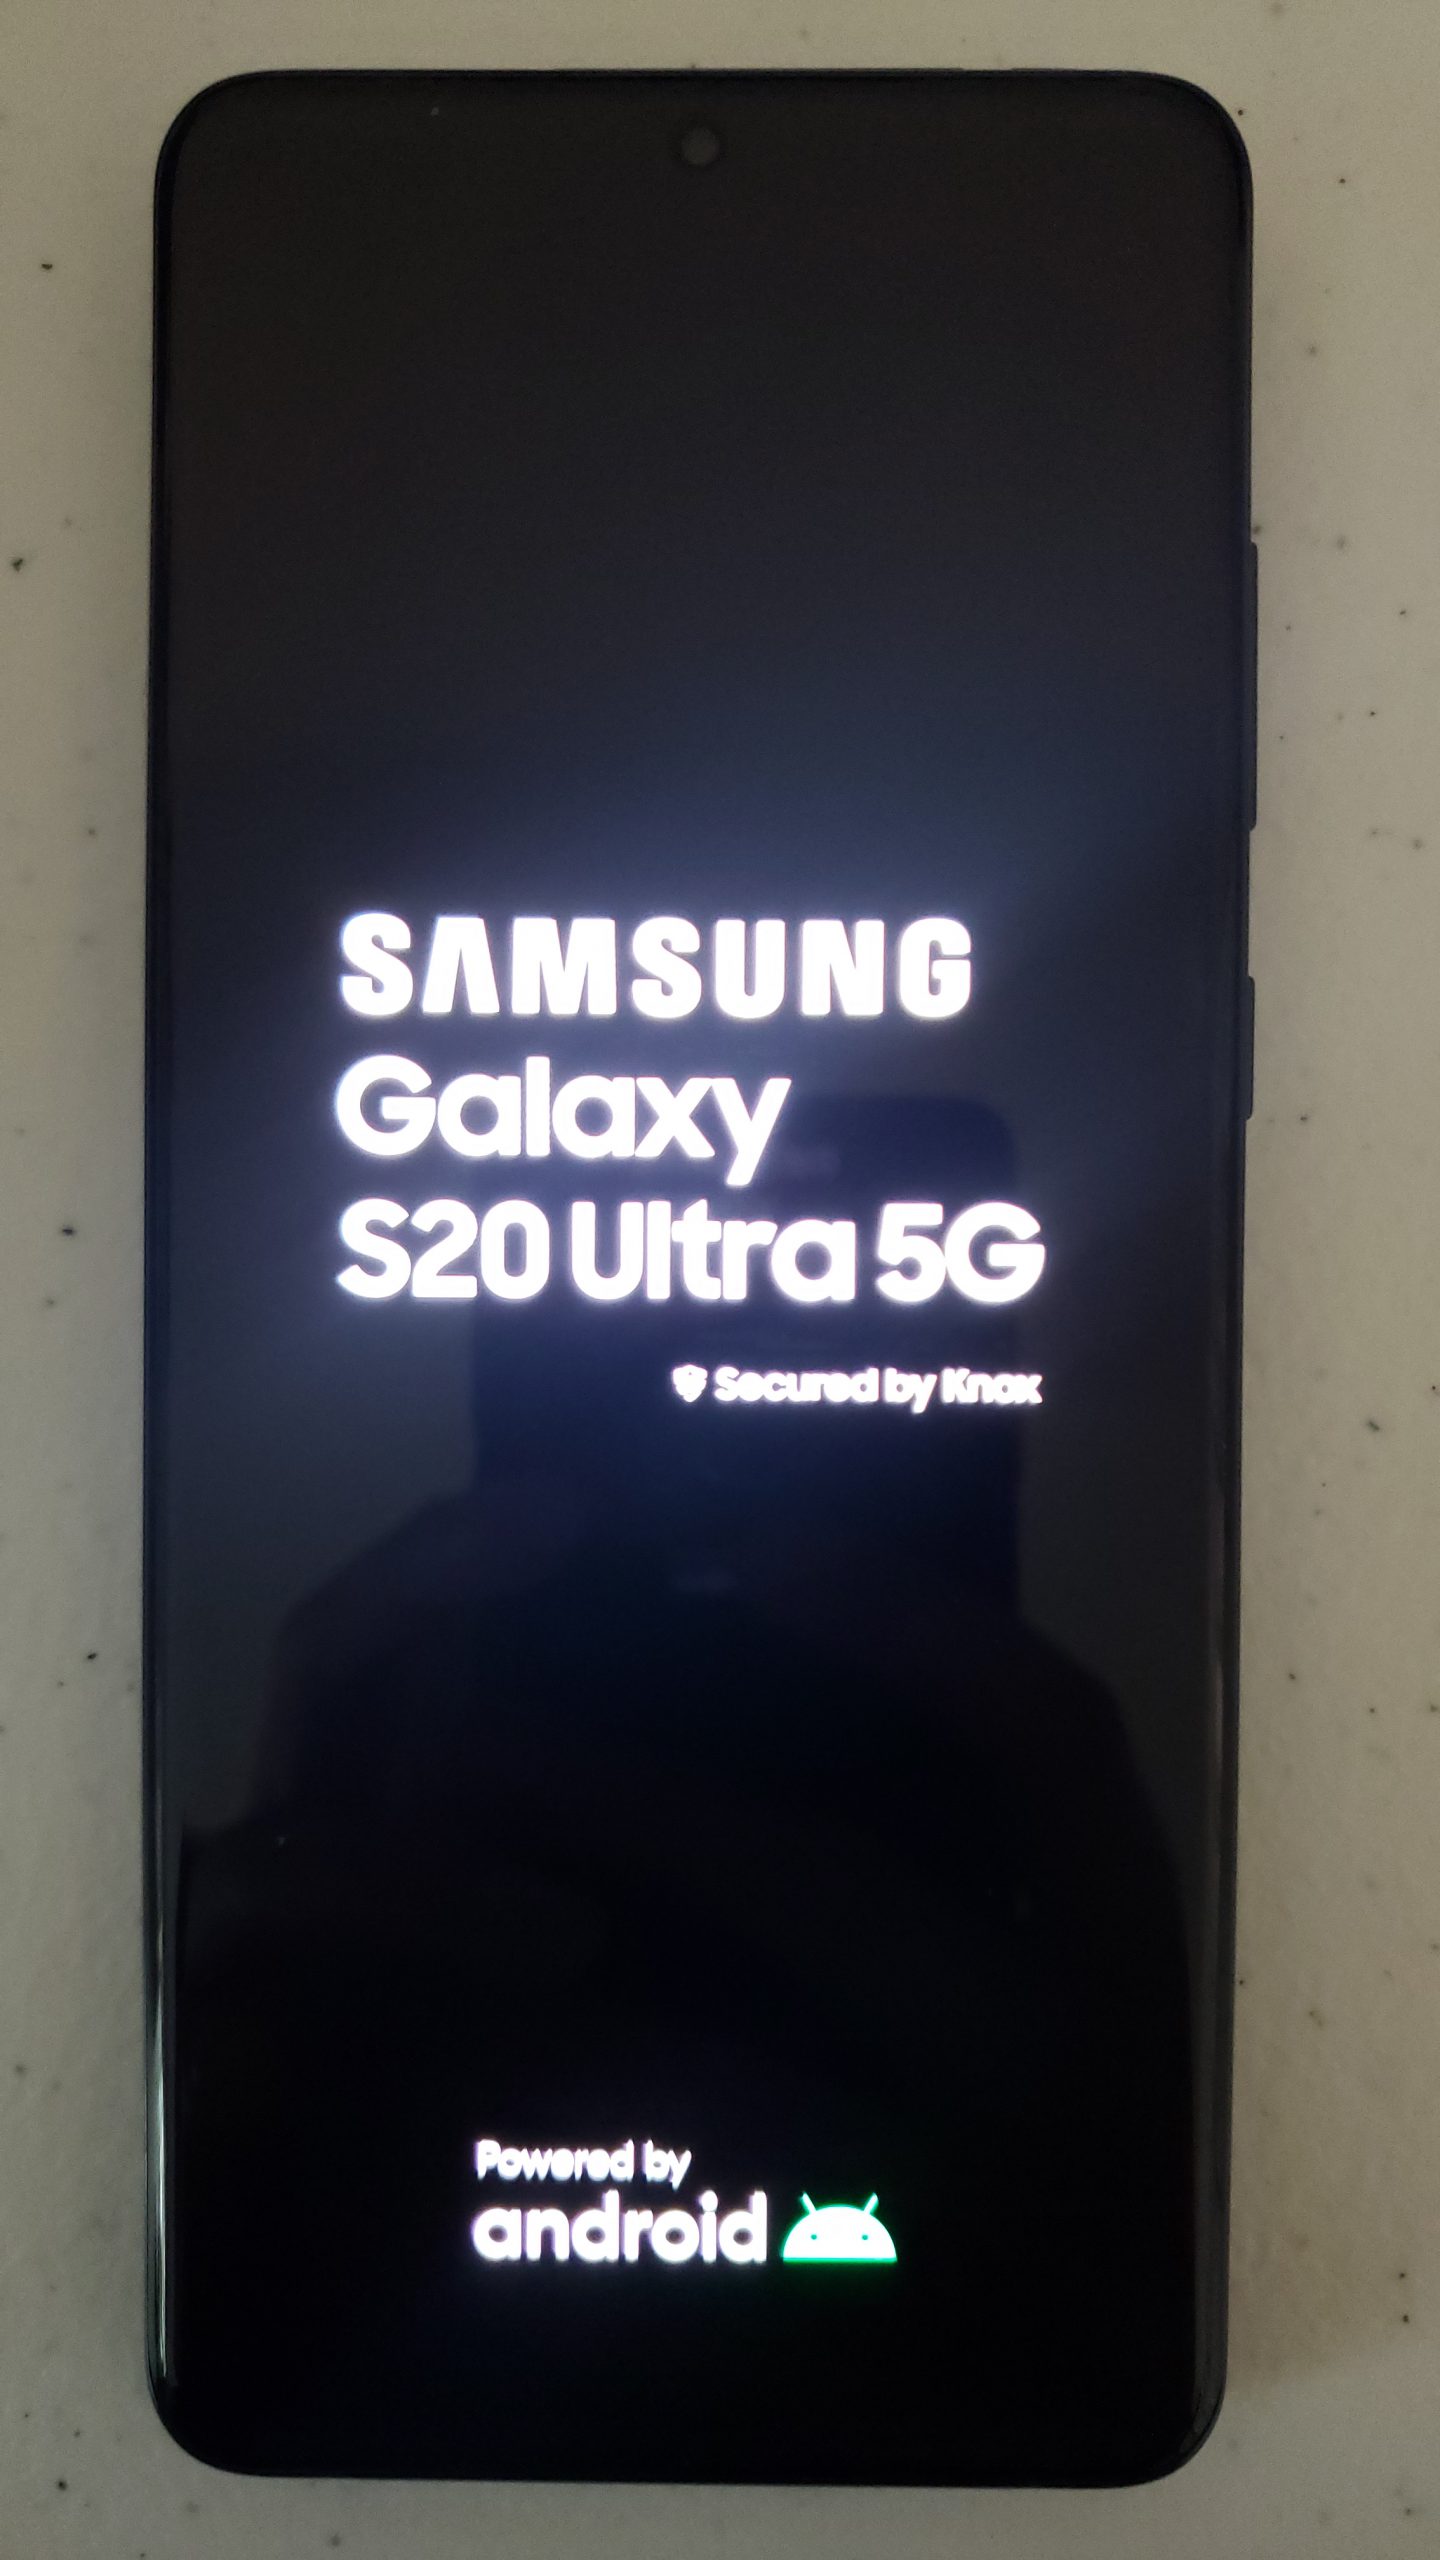 Samsung Galaxy S20 Ultra 5G Unboxing - 14